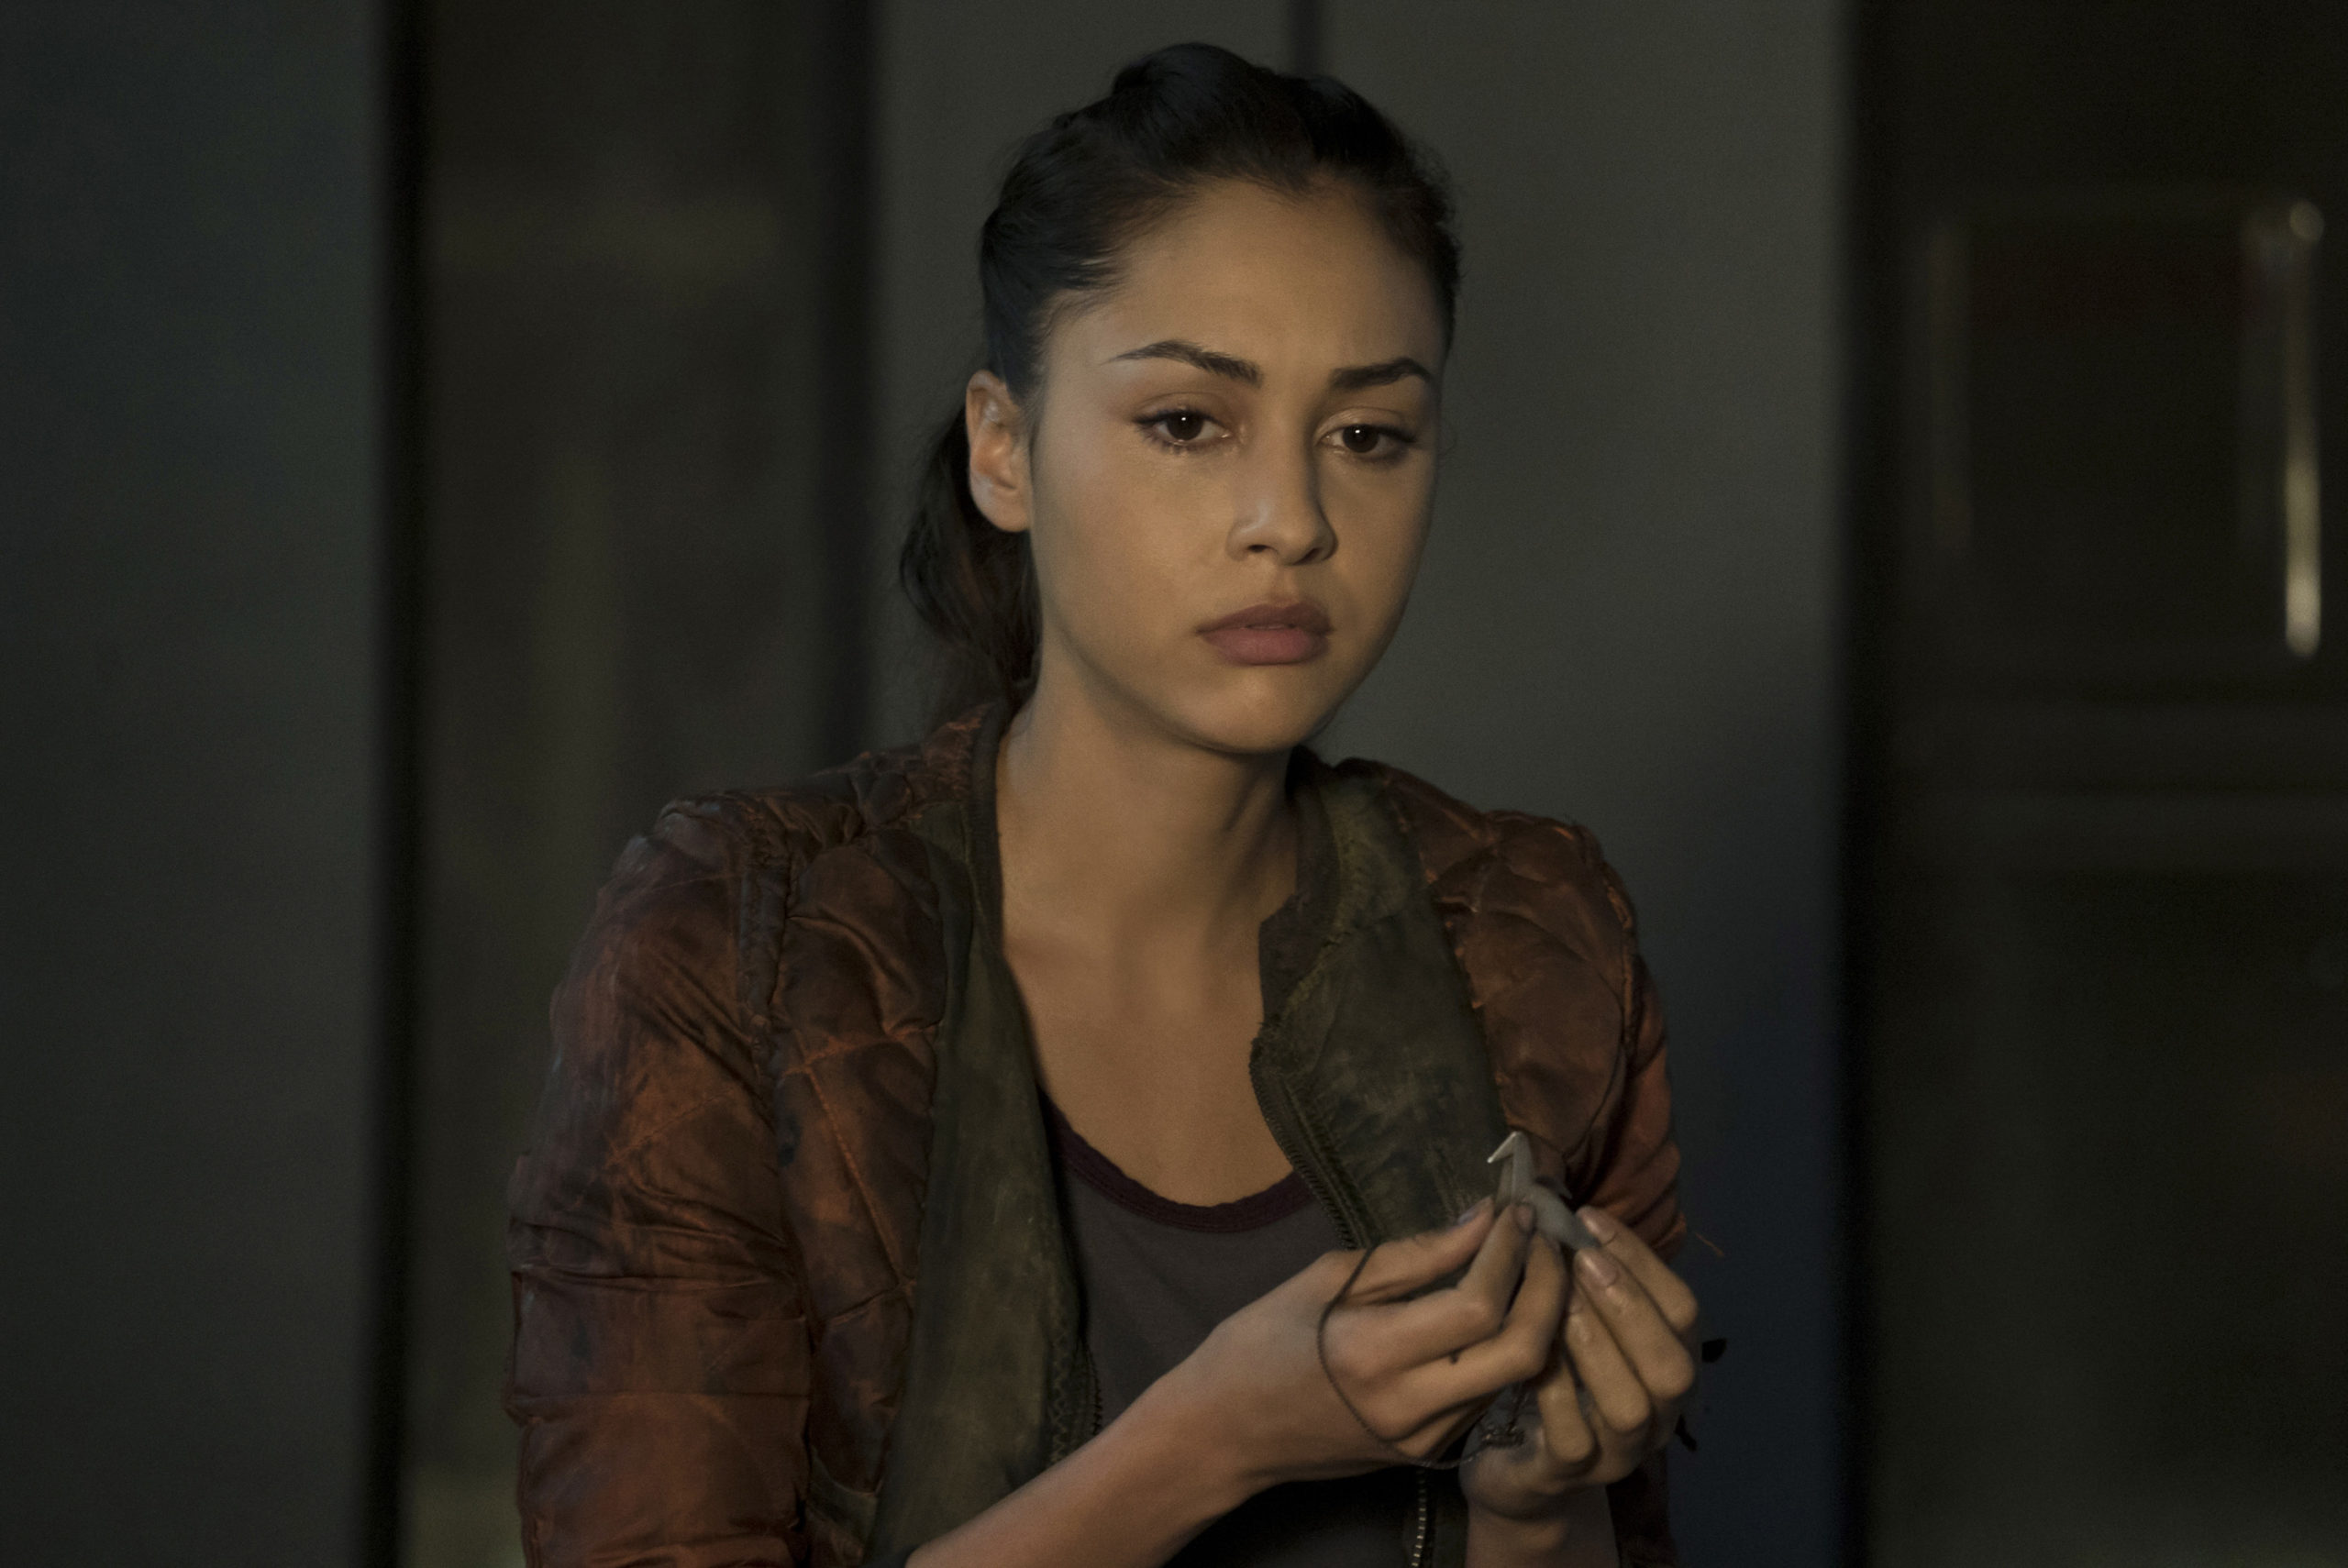 The 100 - Lindsey Morgan as Raven - 'Terms and Conditions'